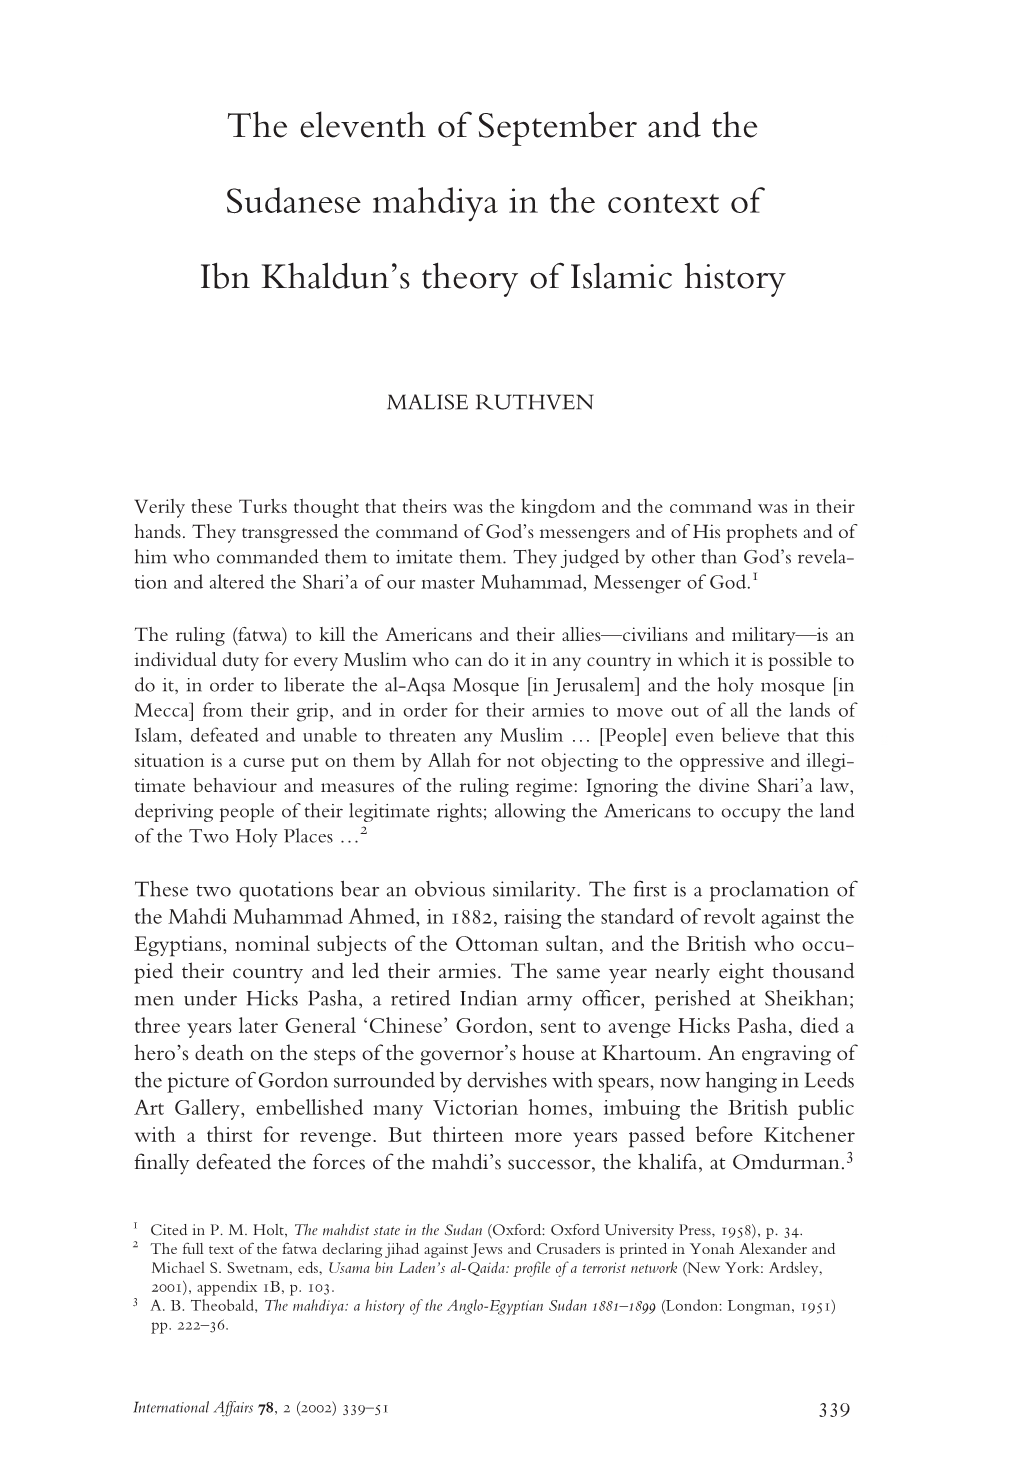 The Eleventh of September and the Sudanese Mahdiya in the Context of Ibn Khaldun’S Theory of Islamic History